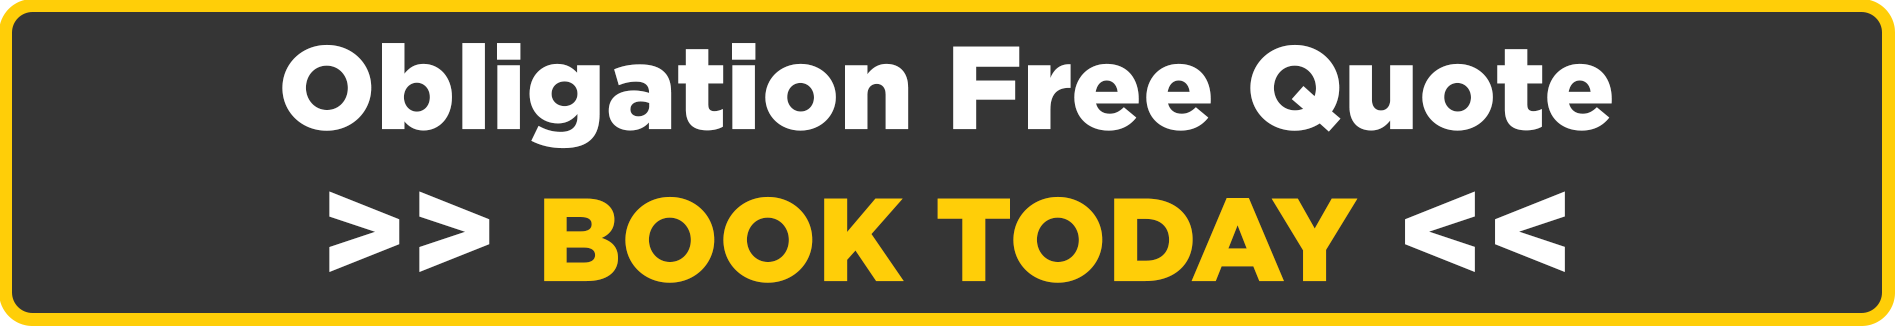 obligation-free-quote-yellow